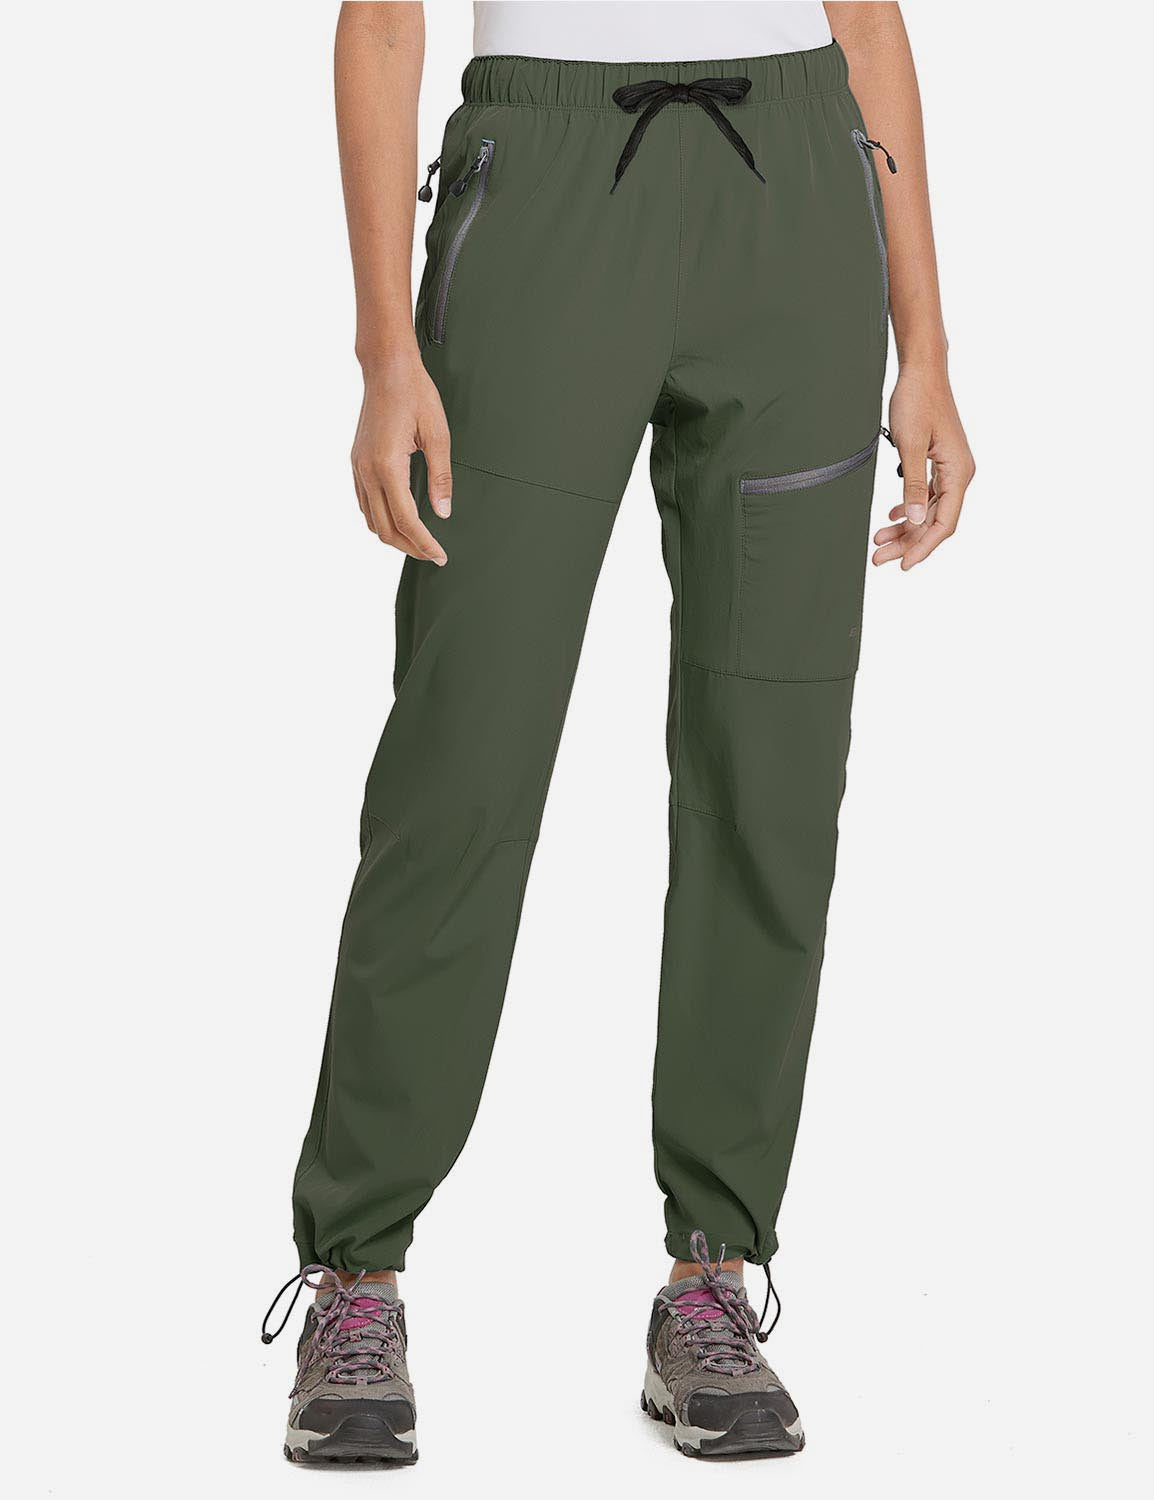 BALEAF Hiking Pants for Women, High Waisted Water Resistant Joggers with  Zipper Pockets, Lightweight Quick Dry Outdoor, Army Green, X-Small